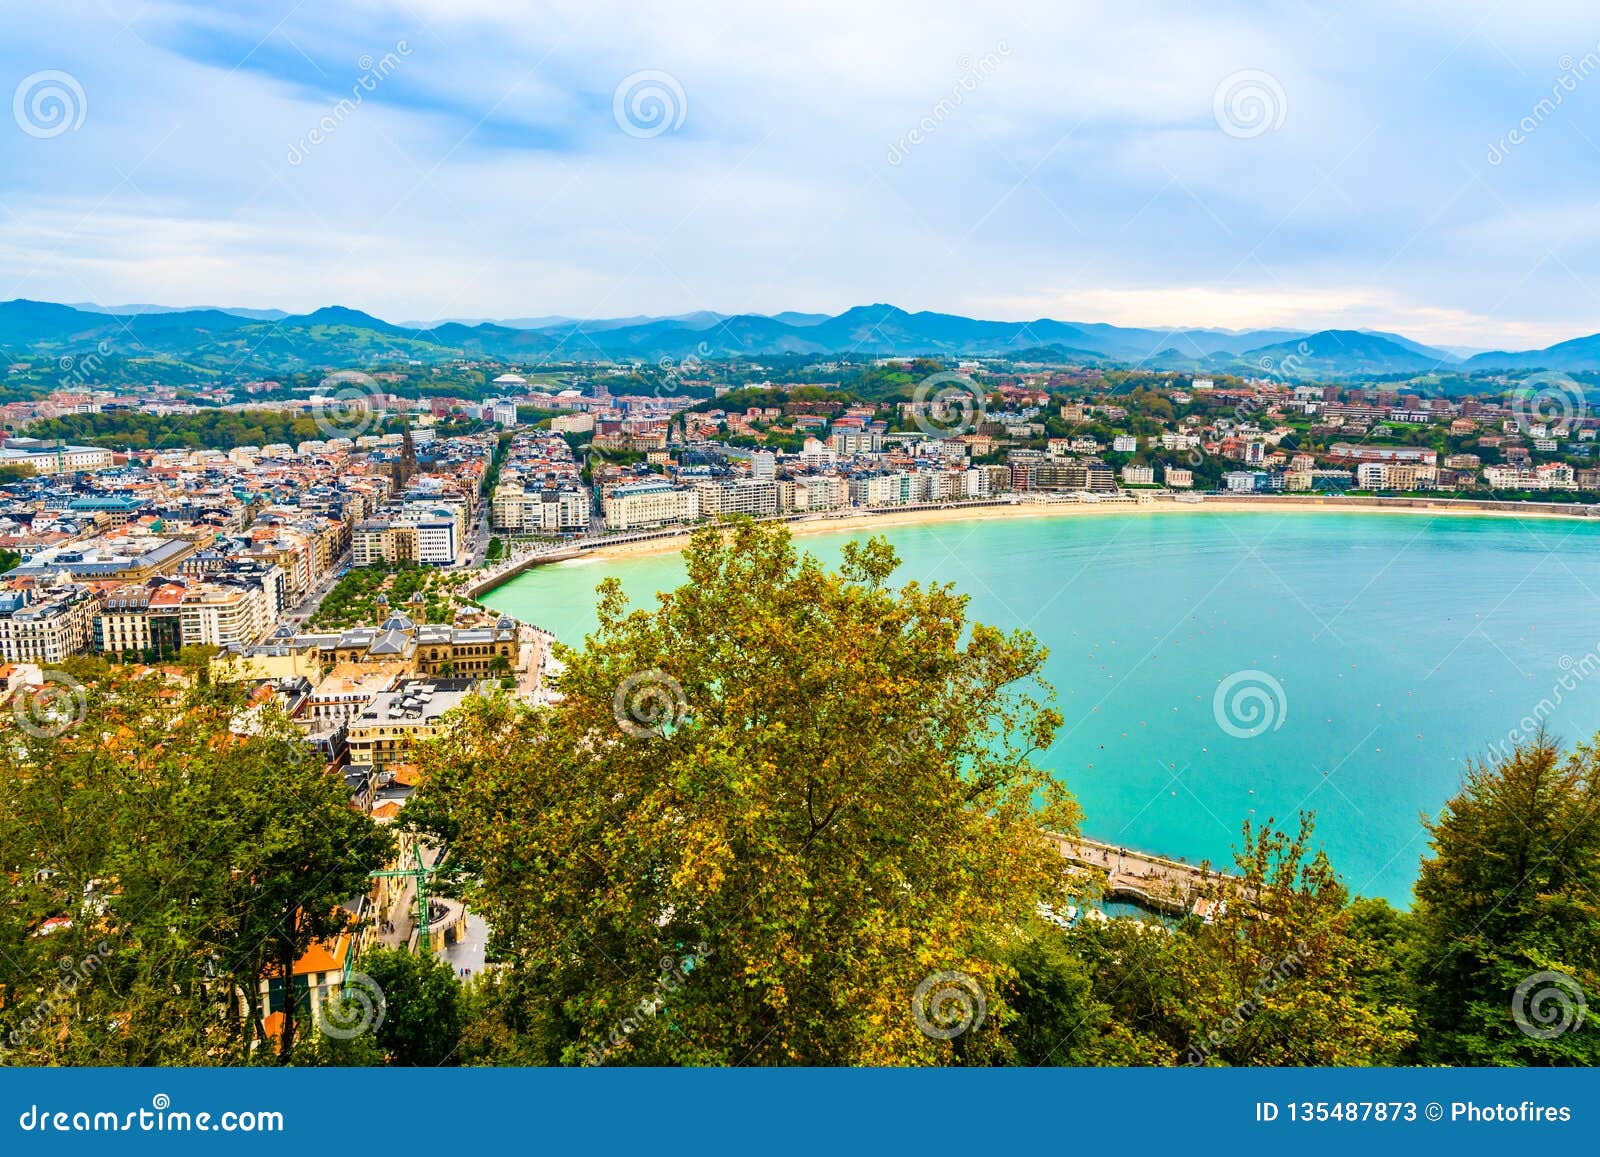 aerial view of an sebastian and the bay of biscay, basque country, spain